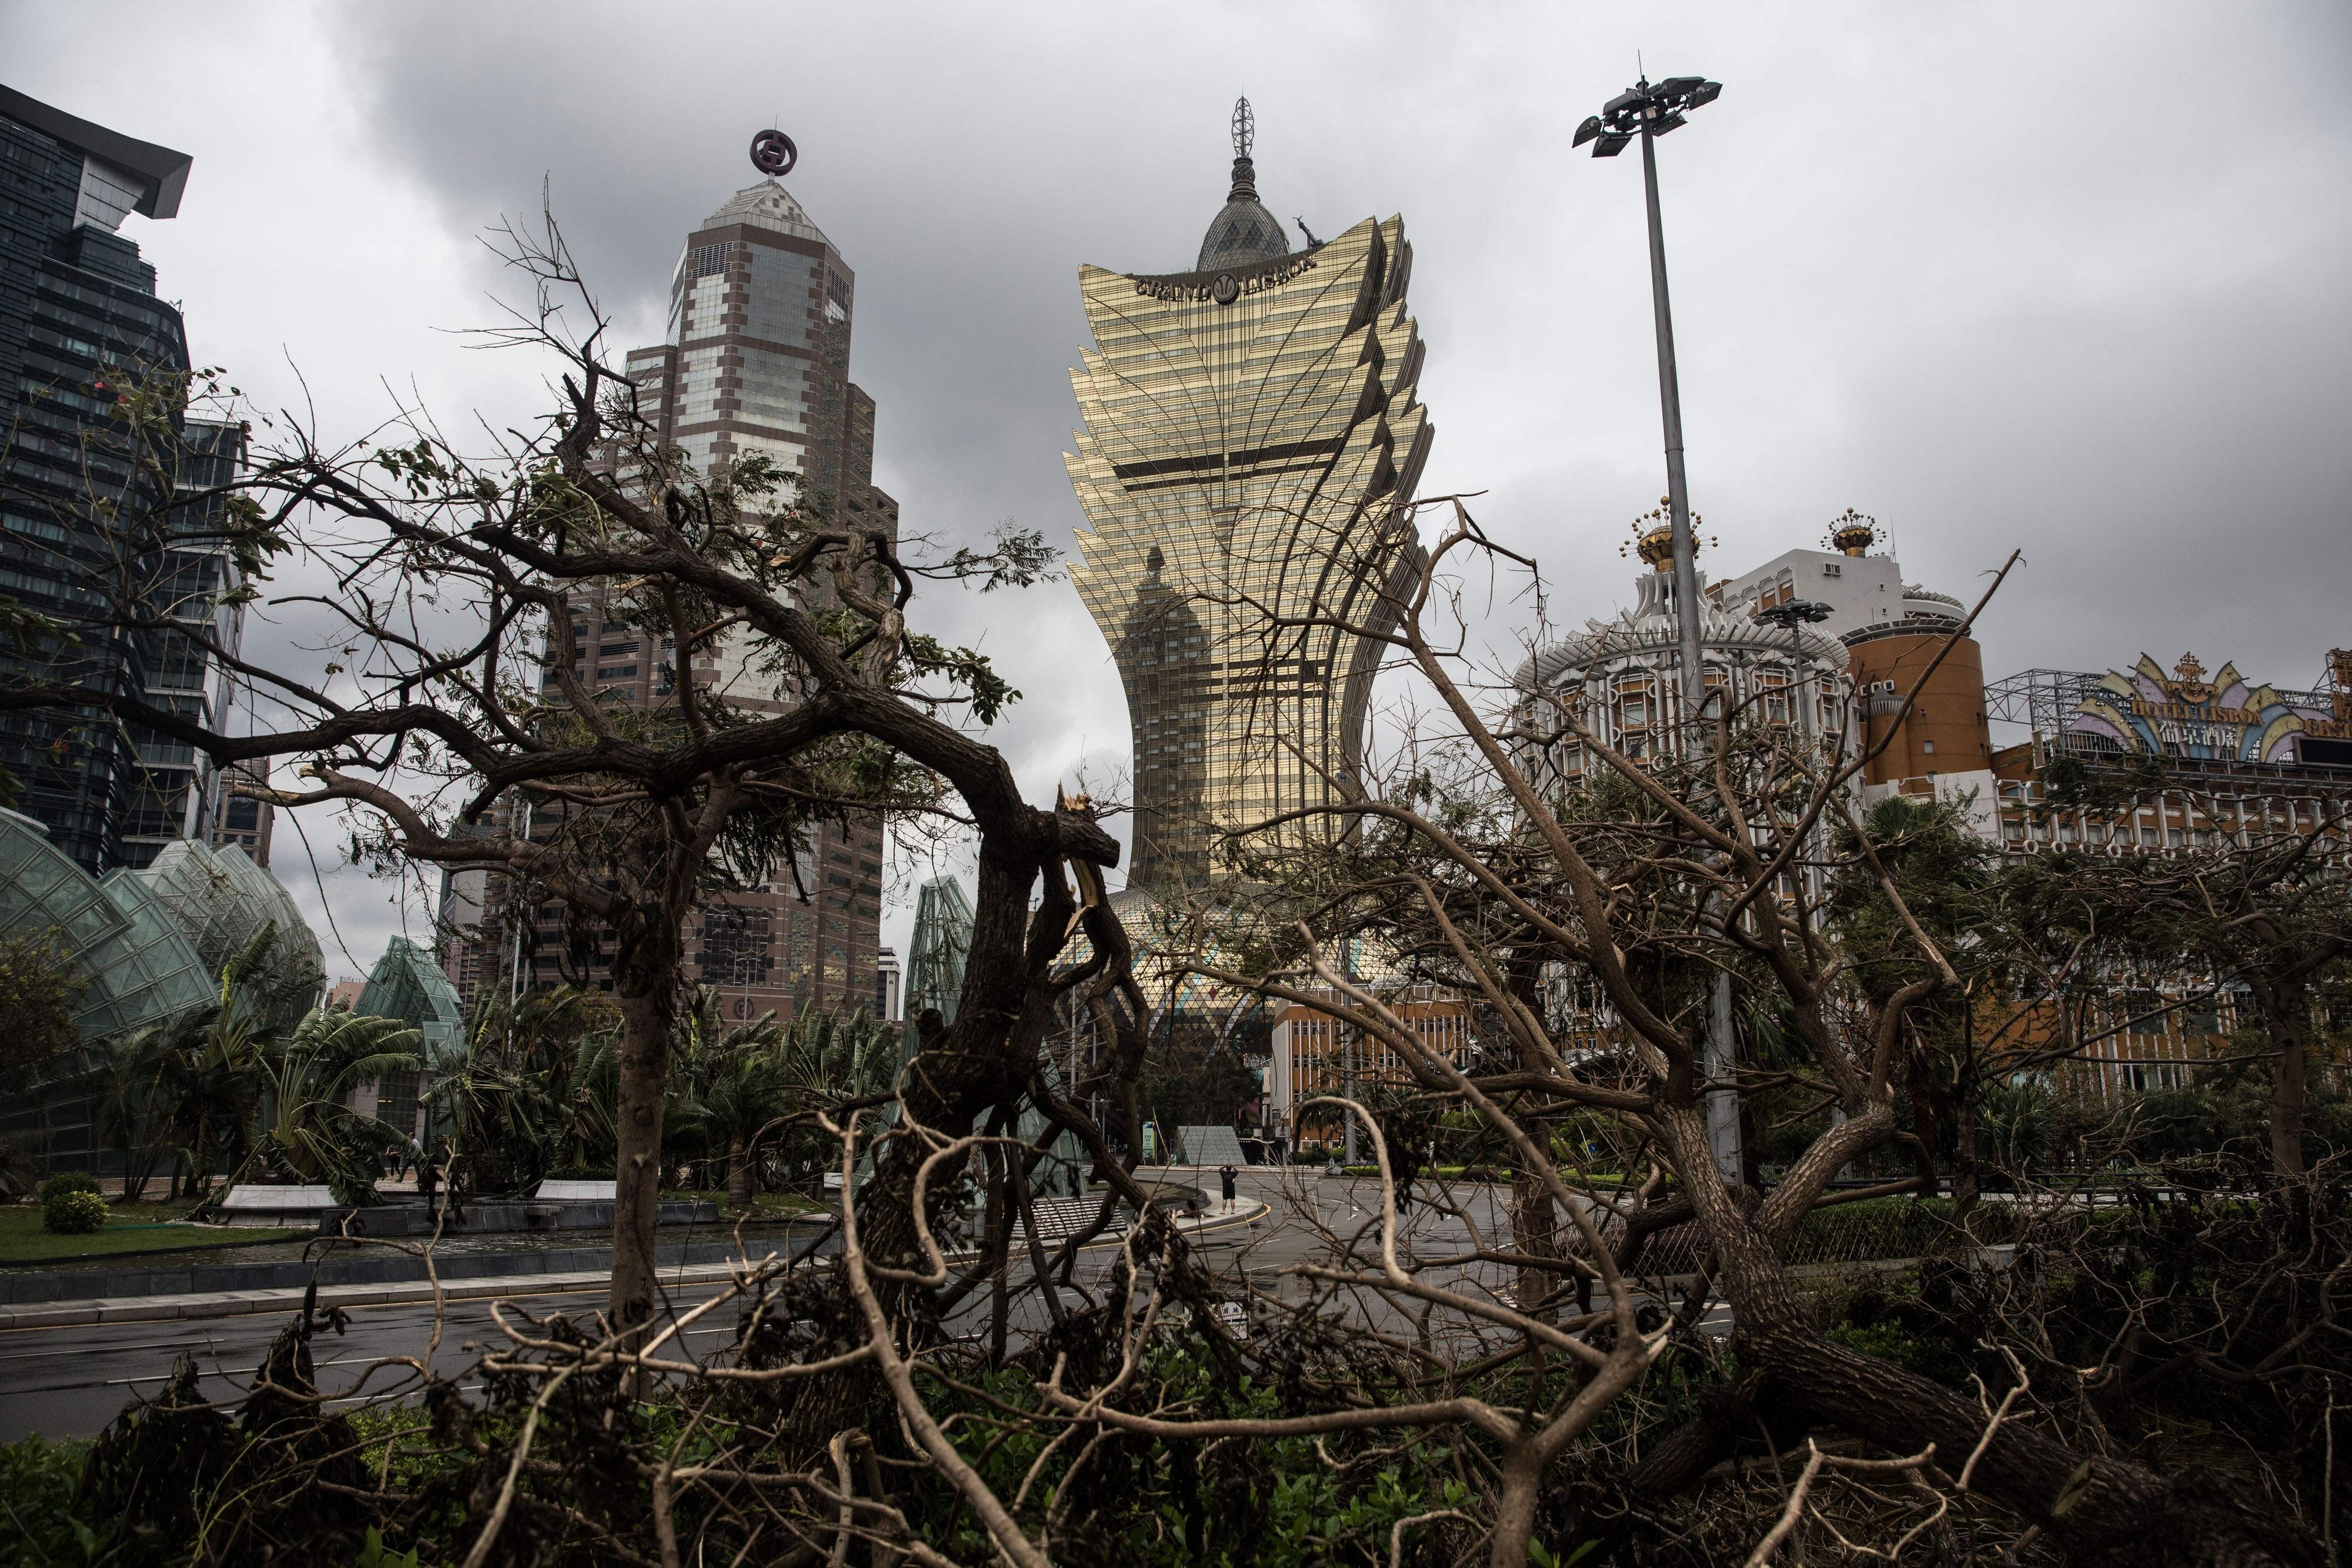 Hato struck Macau on August 23, leaving much of the city without power or drinking water. Photo: AFP